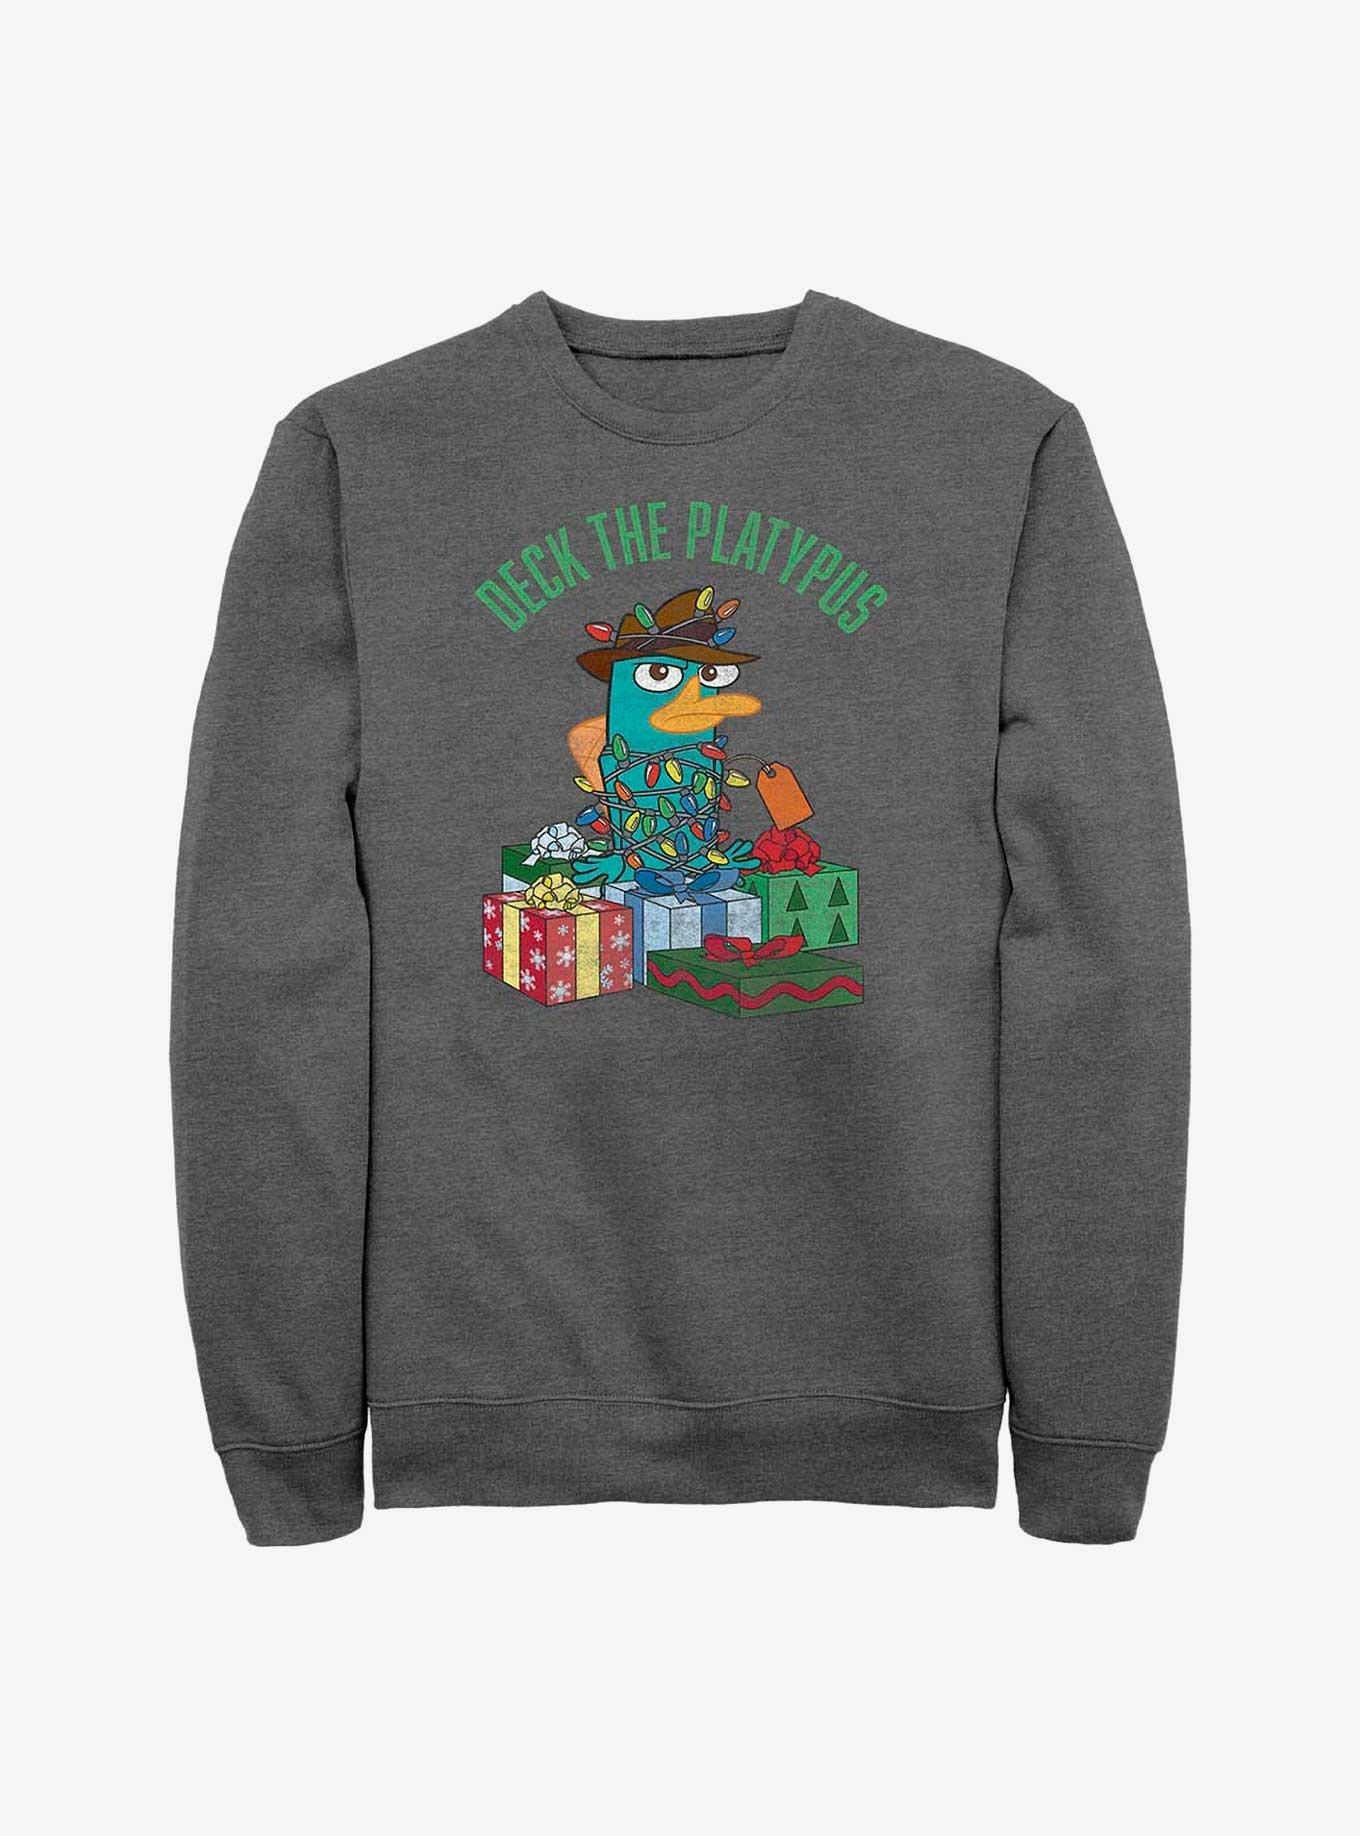 Disney Phineas And Ferb Wrapped Up Perry Crew Sweatshirt